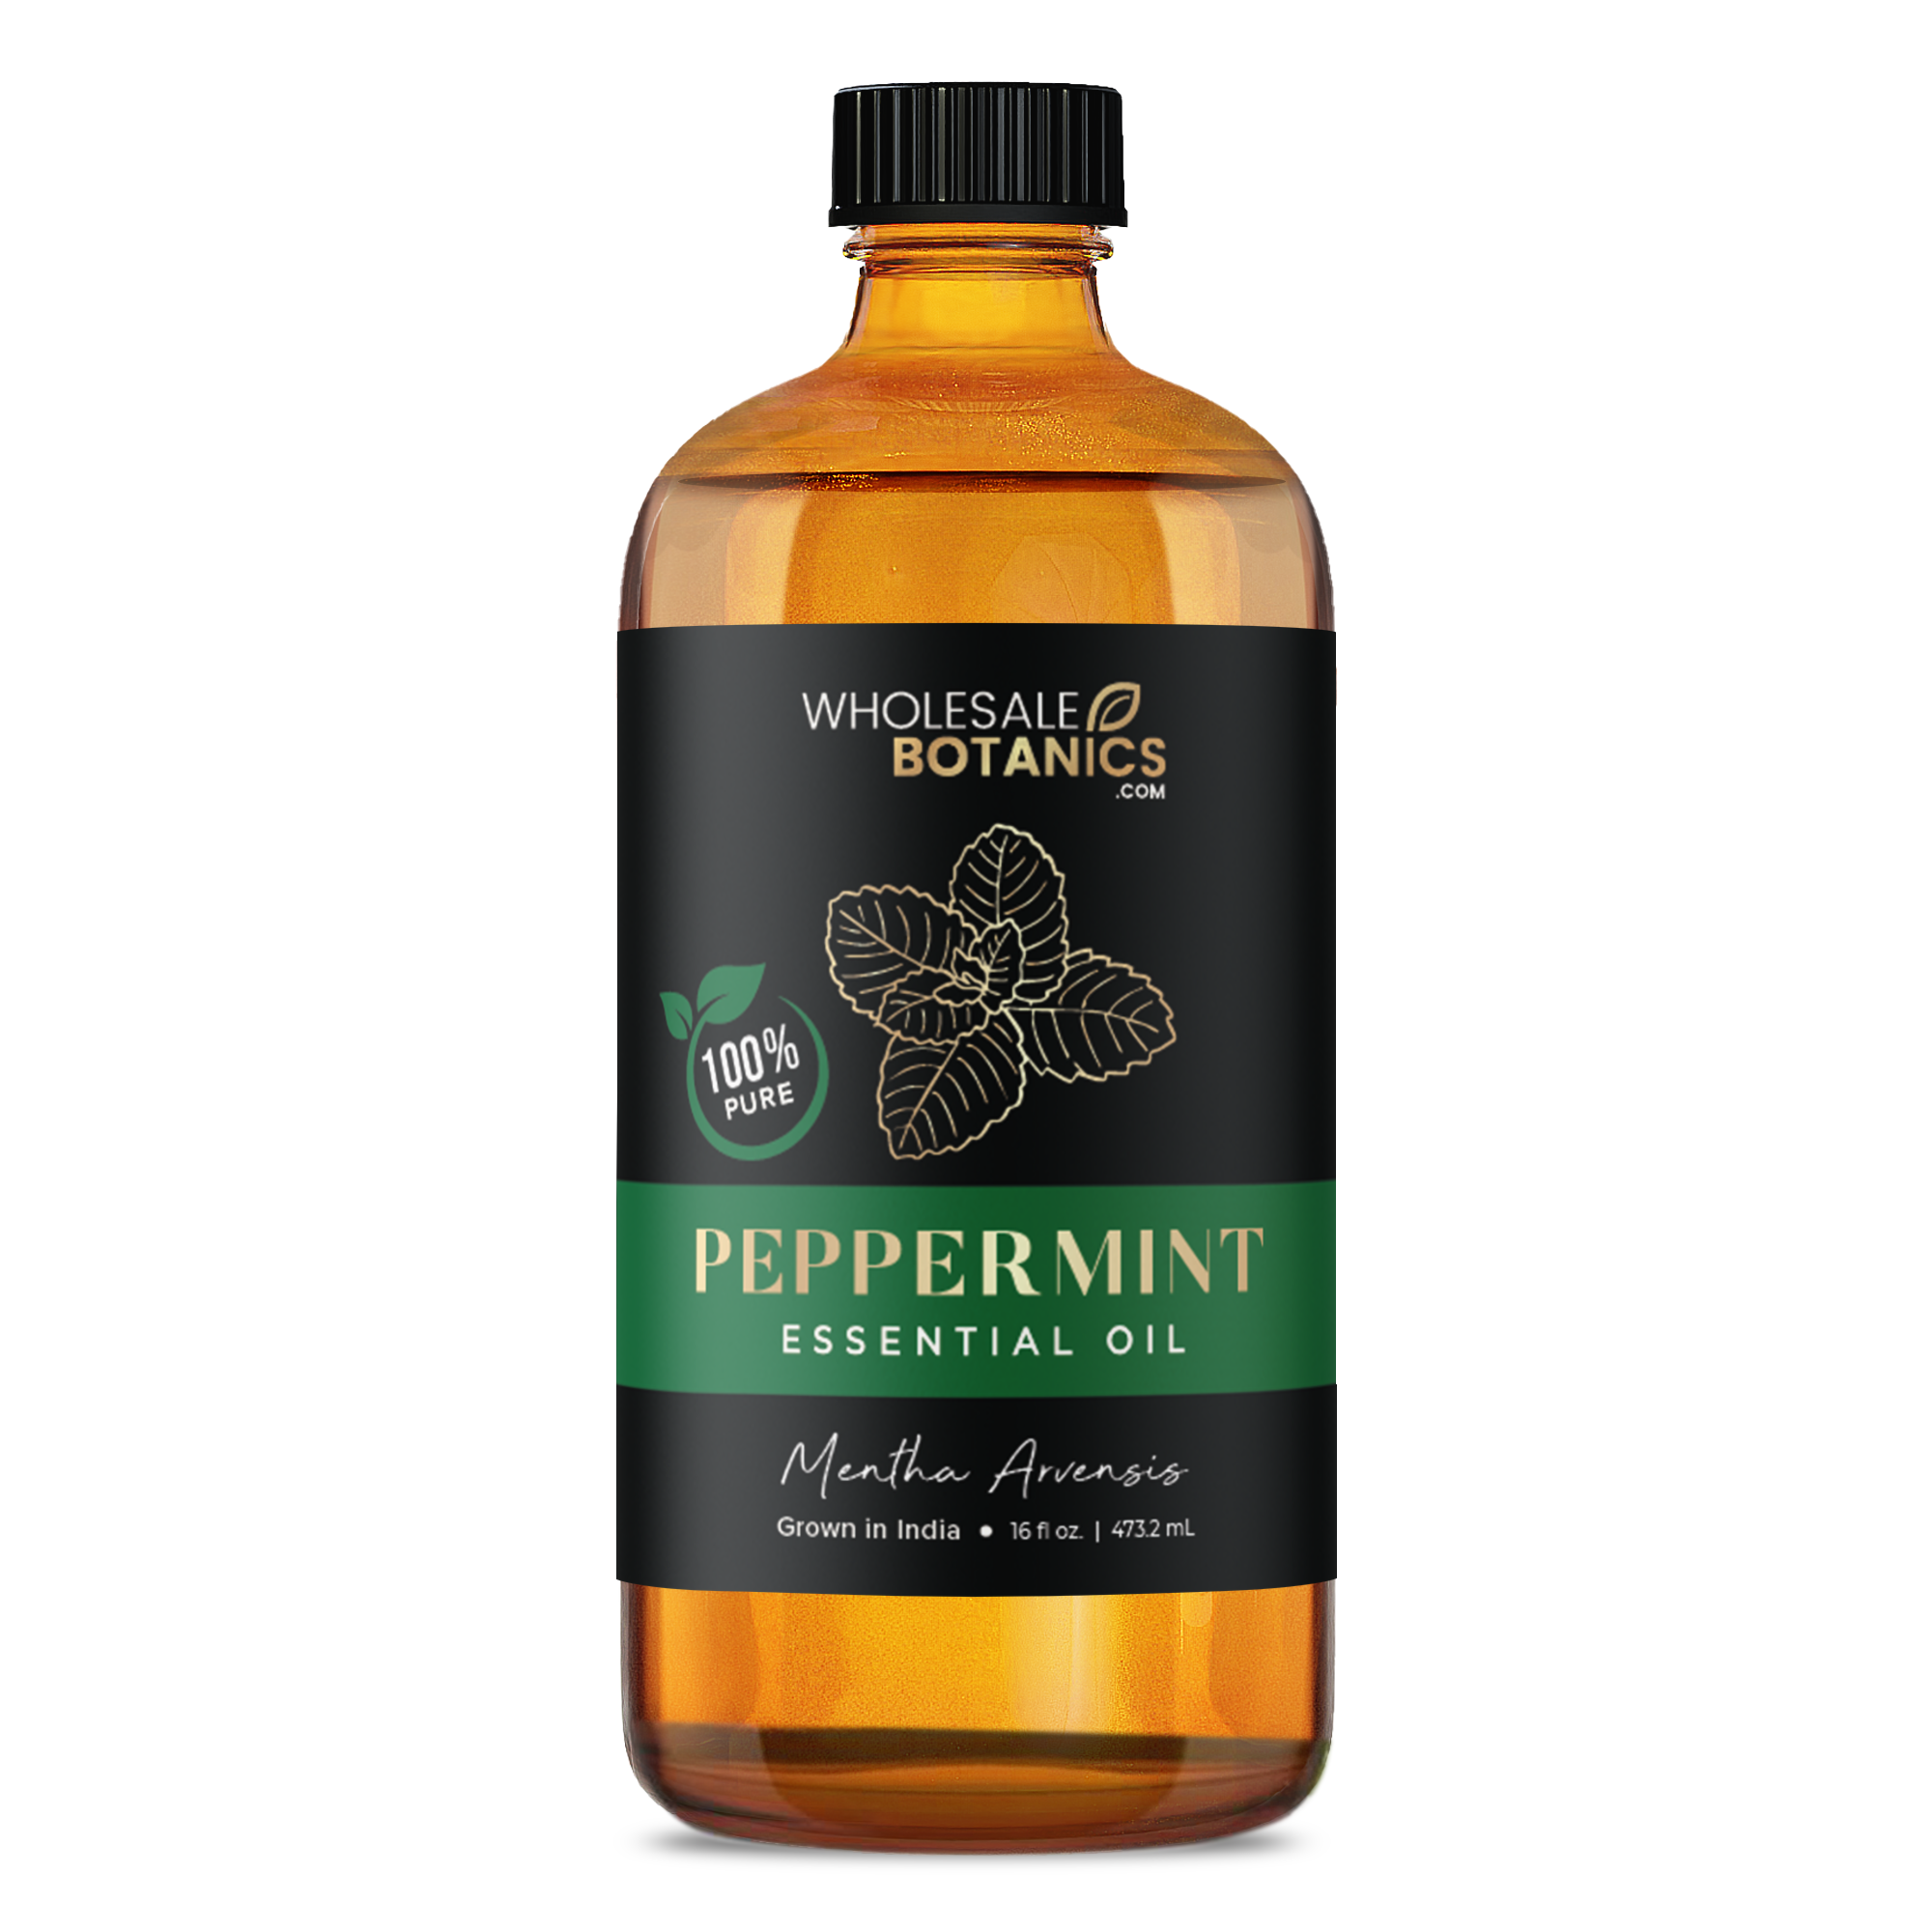 Purity Peppermint Essential Oil - Pure Mentha Arvensis - 16 oz